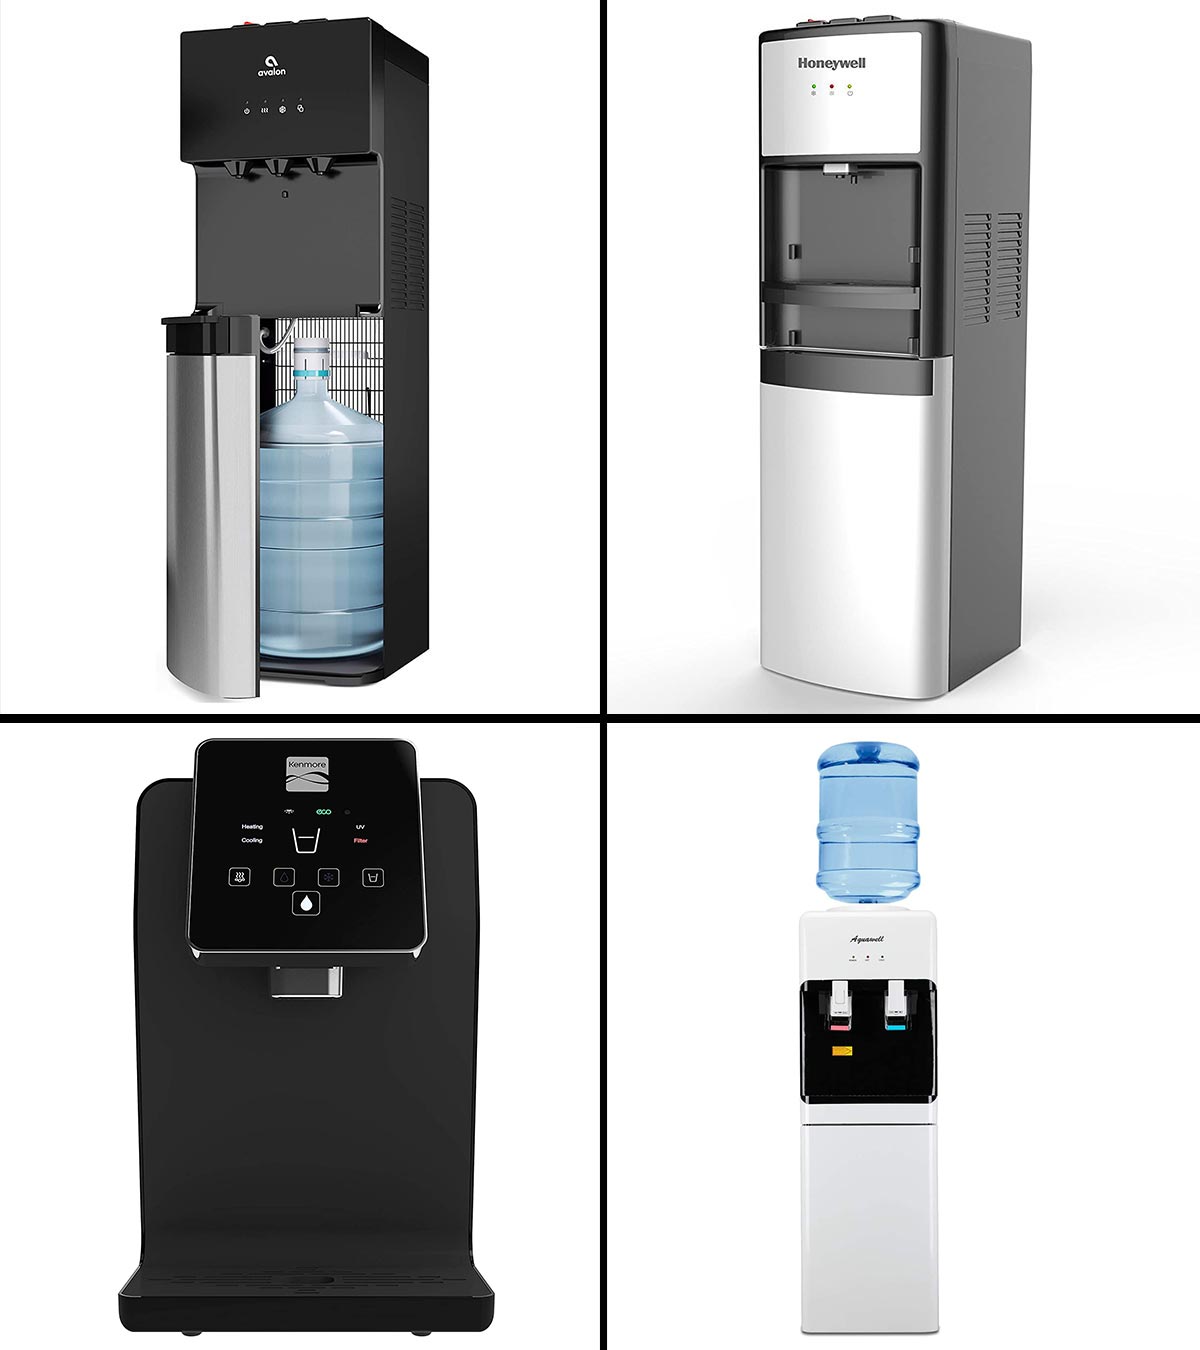 Home Best water solutions, coolers dispensers and more